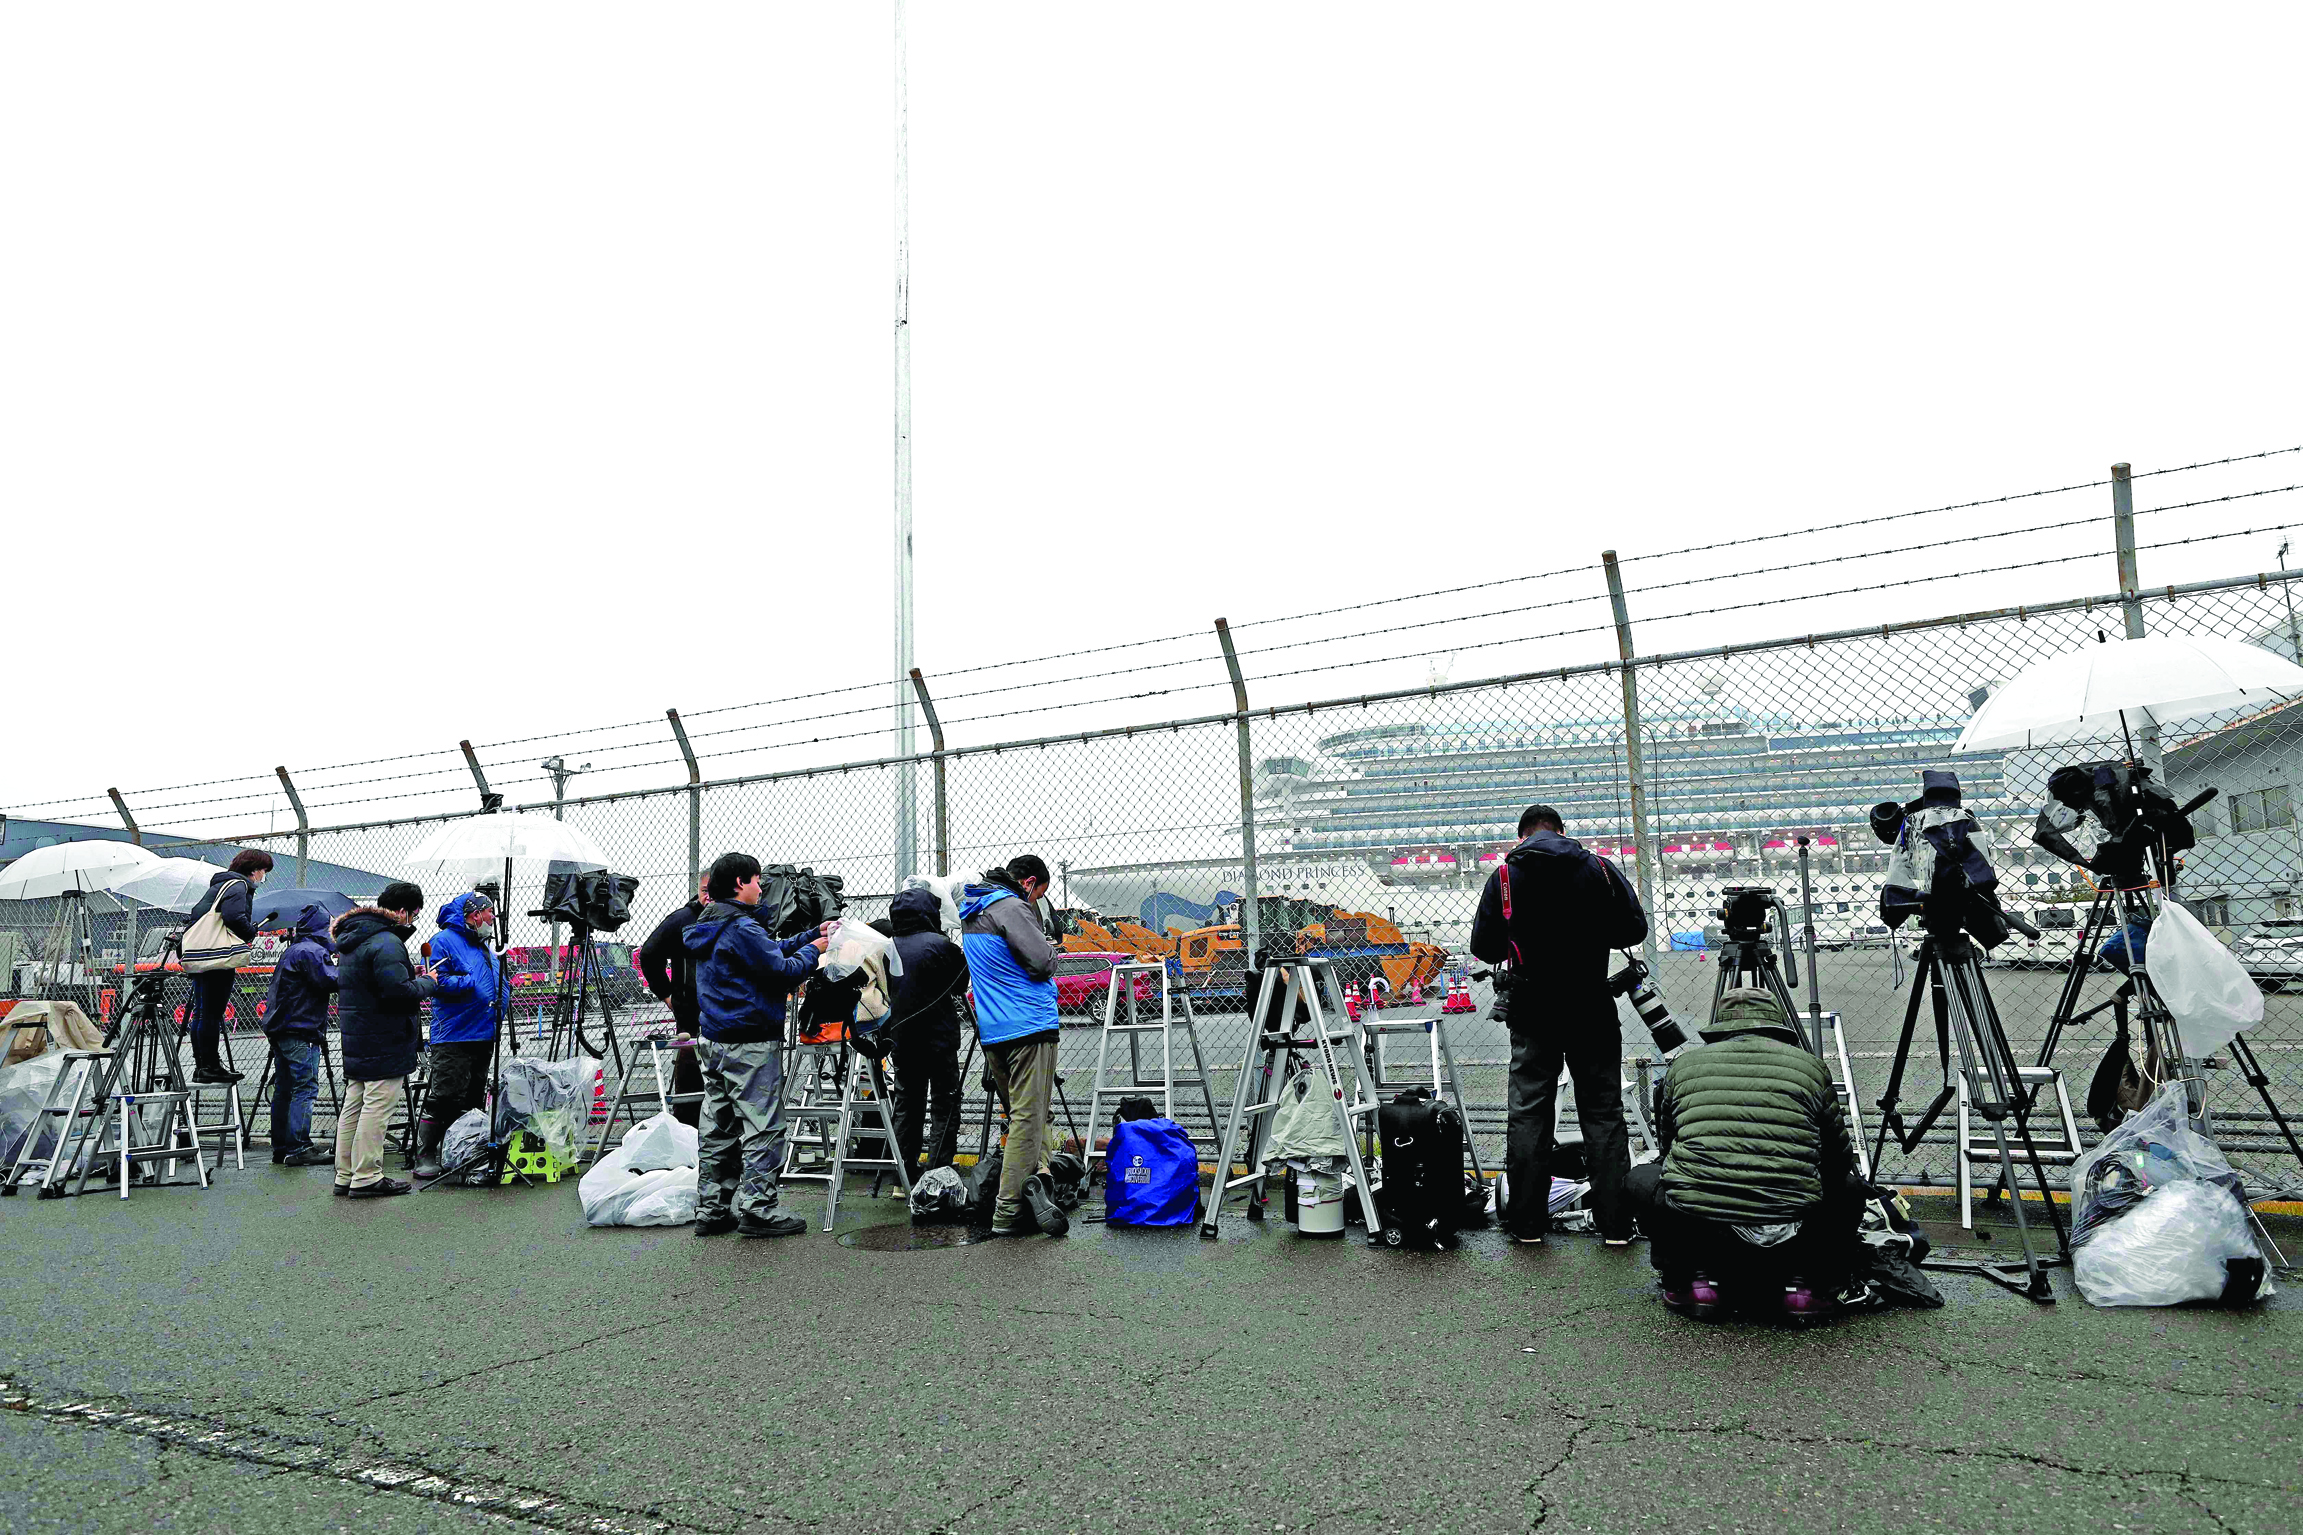 Members of the media wait near the Diamond Princess cruise ship, with people quarantined onboard due to fears of the new COVID-19 coronavirus, at the Daikaku Pier Cruise Terminal in Yokohama port on February 16, 2020. - The number of people who have tested positive for the new coronavirus on a quarantined ship off Japan's coast has risen to 355, the country's health minister said. (Photo by Behrouz MEHRI / AFP)